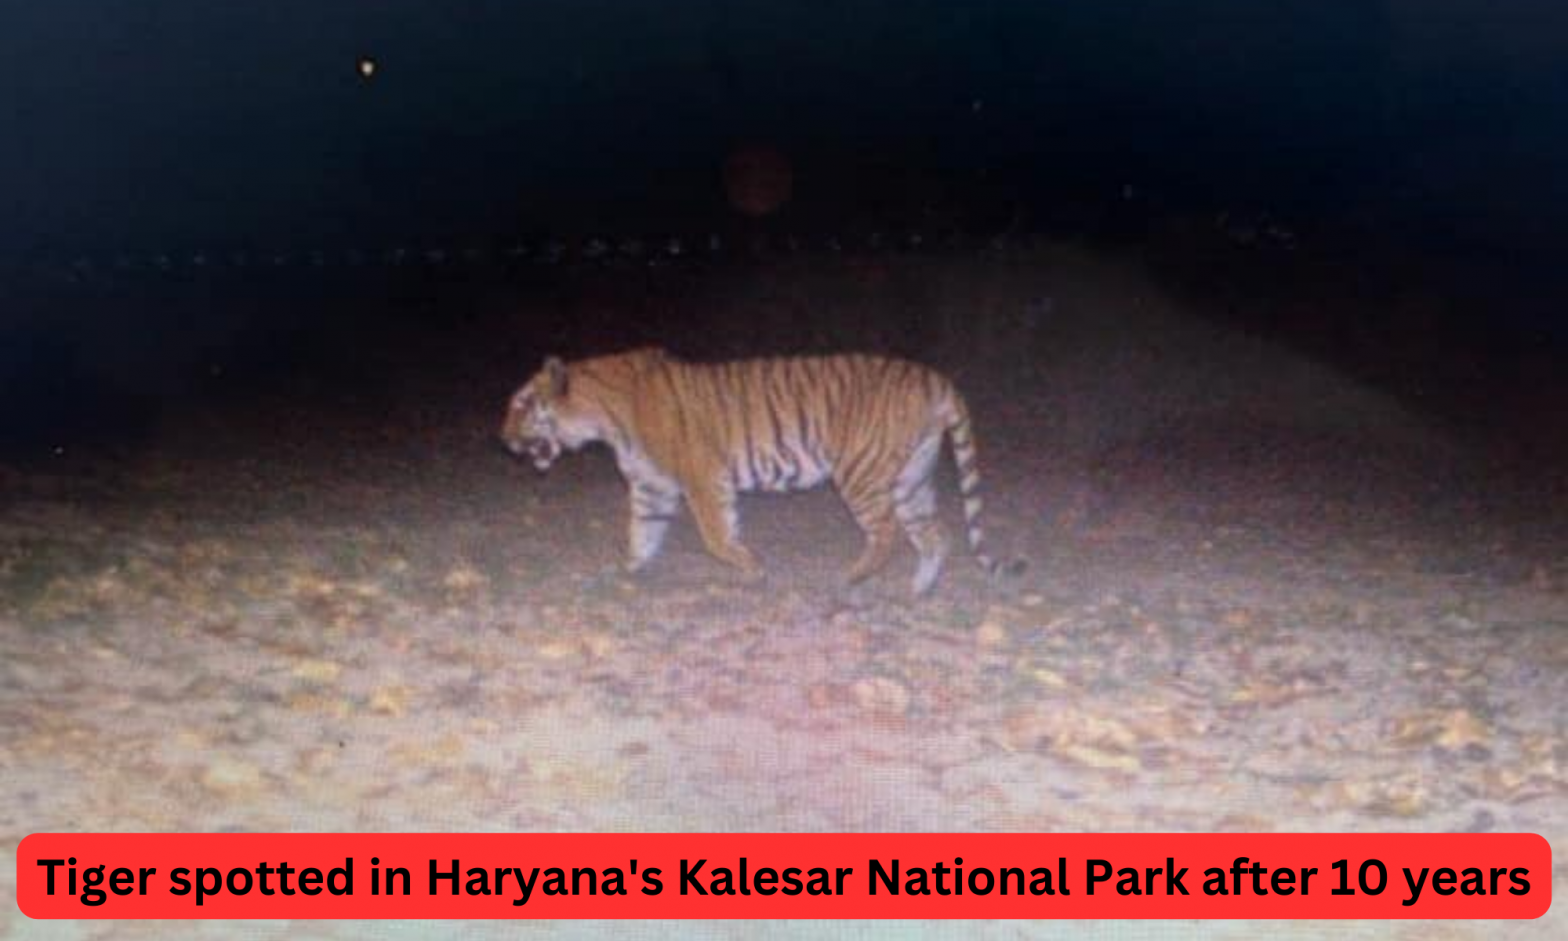 Tiger spotted in Haryana's Kalesar National Park after 10 years